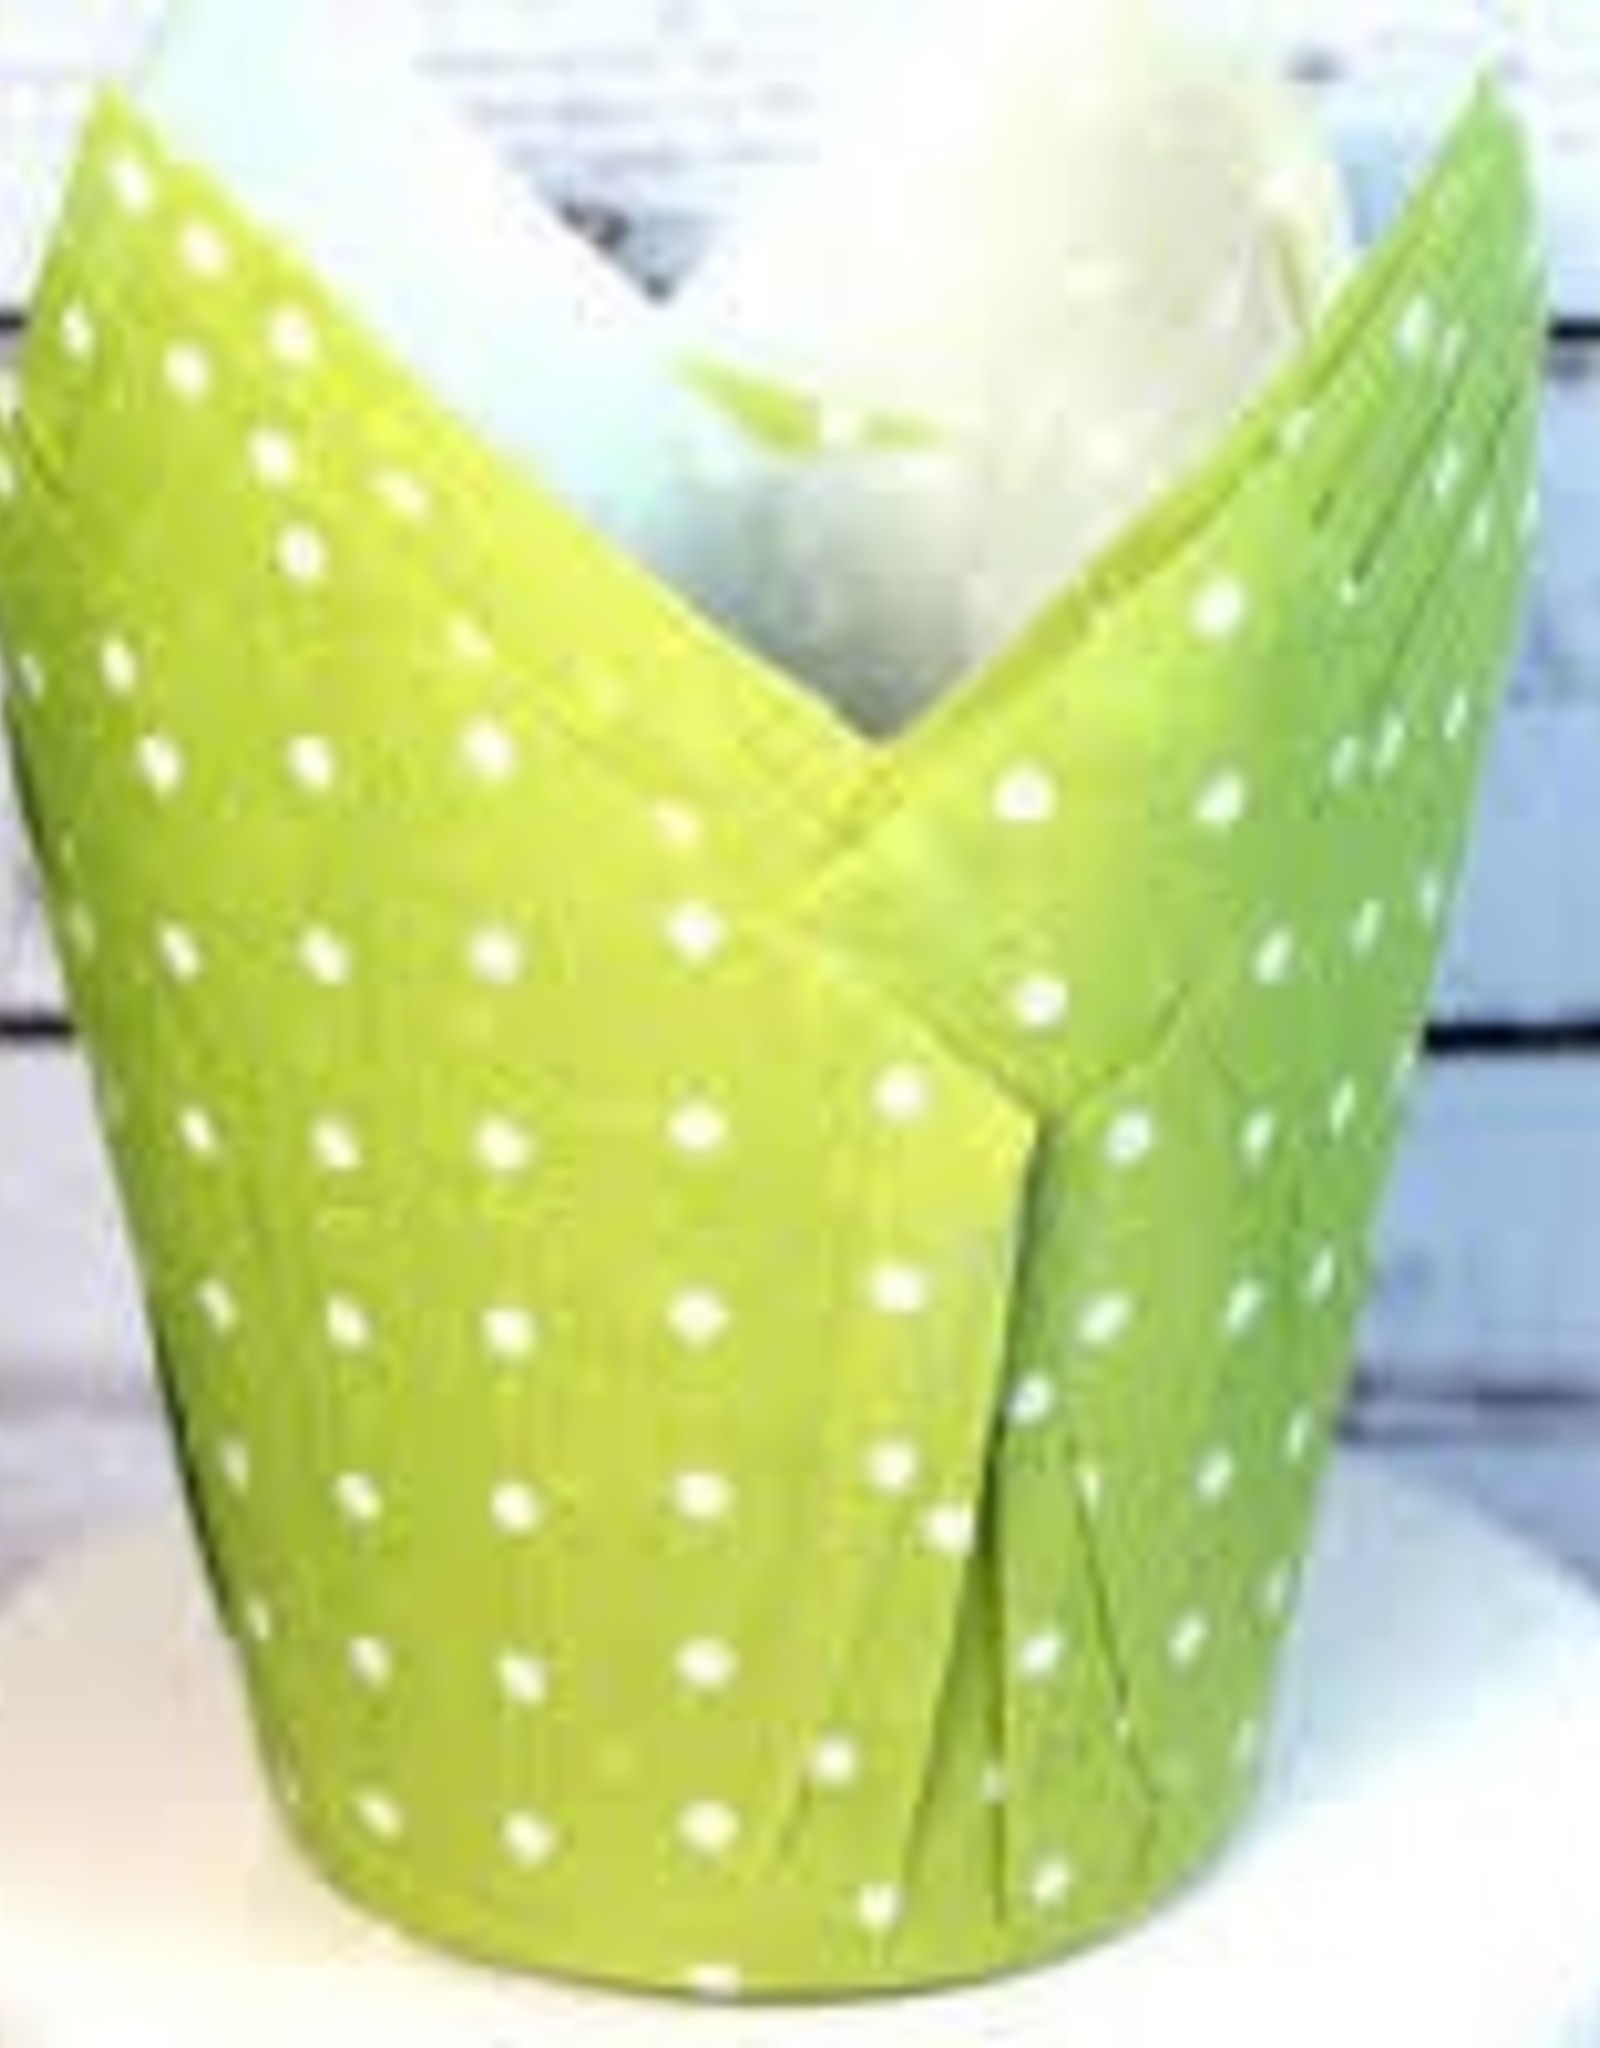 Tulip Baking Cups (Lime Green Dot)